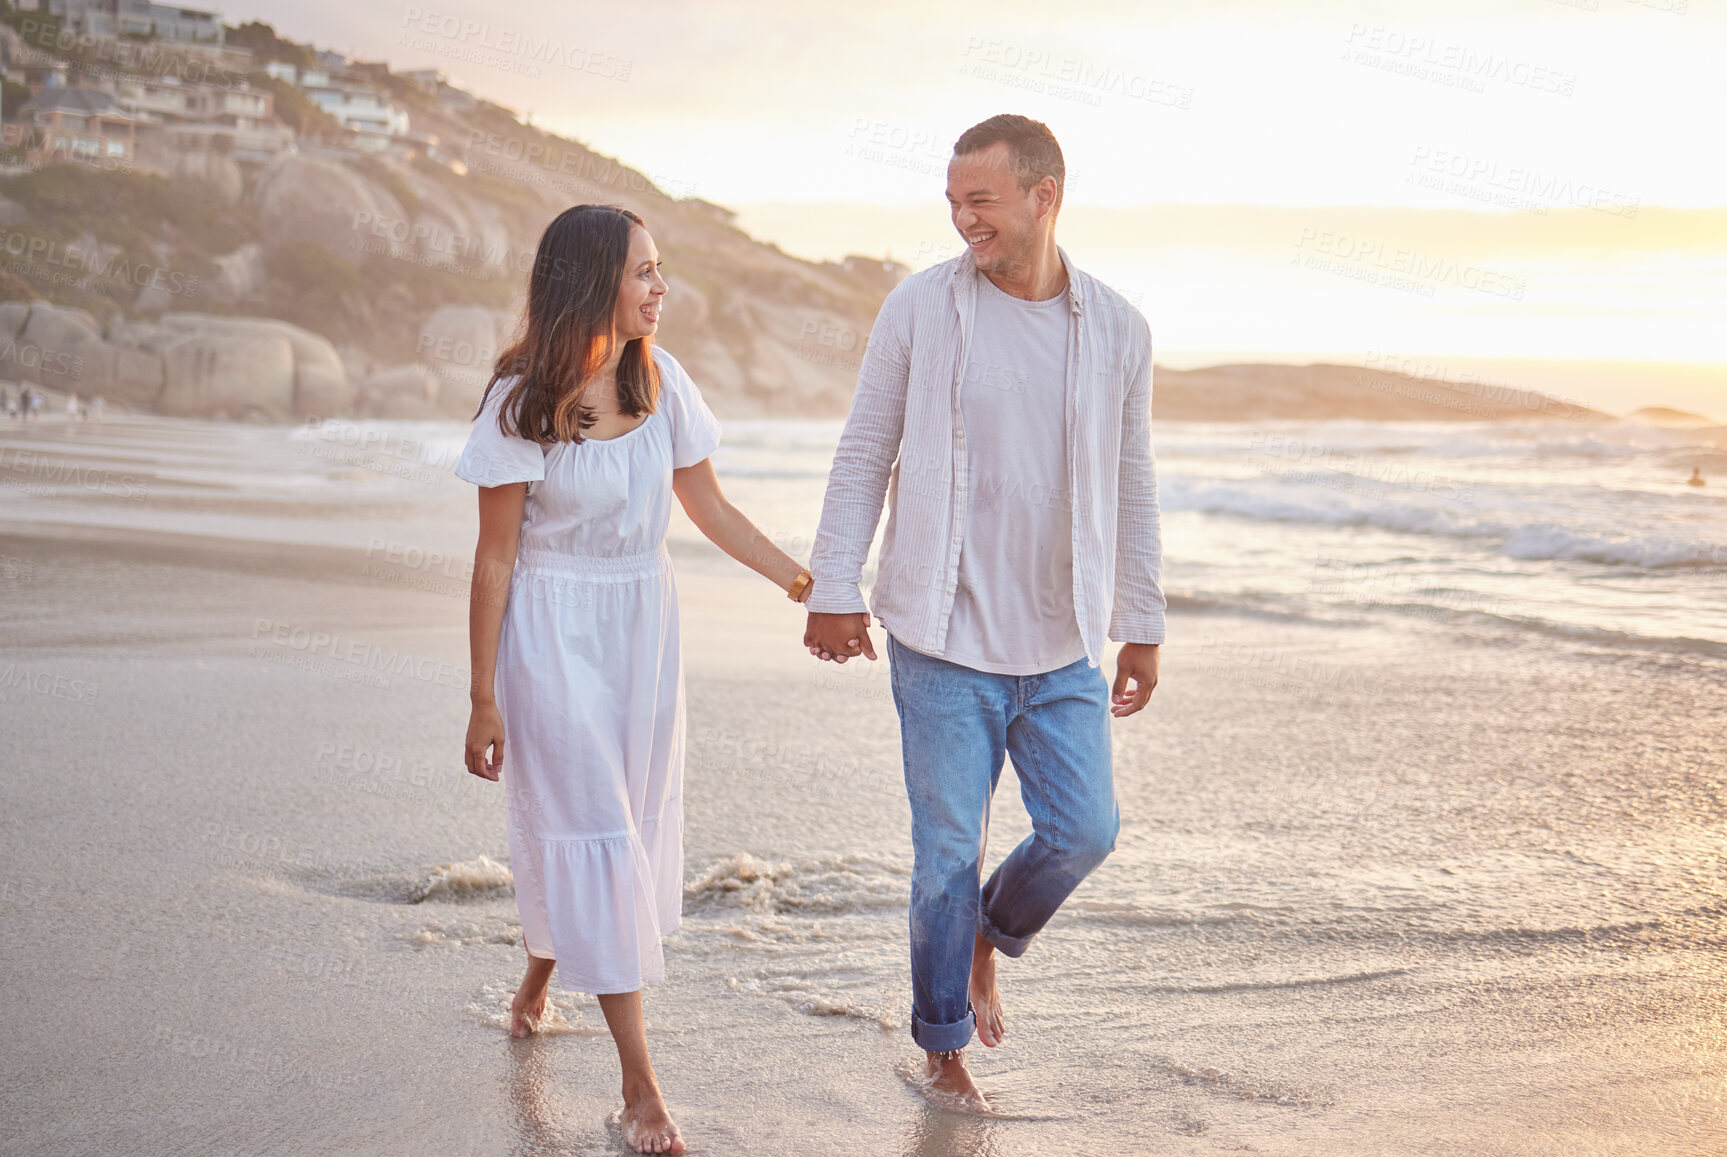 Buy stock photo Affectionate mixed race couple holding hands and walking along the beach. Husband and wife hand in hand in the sand by the sea. Enjoying a romantic walk by the seashore at sunset. Love is in the air